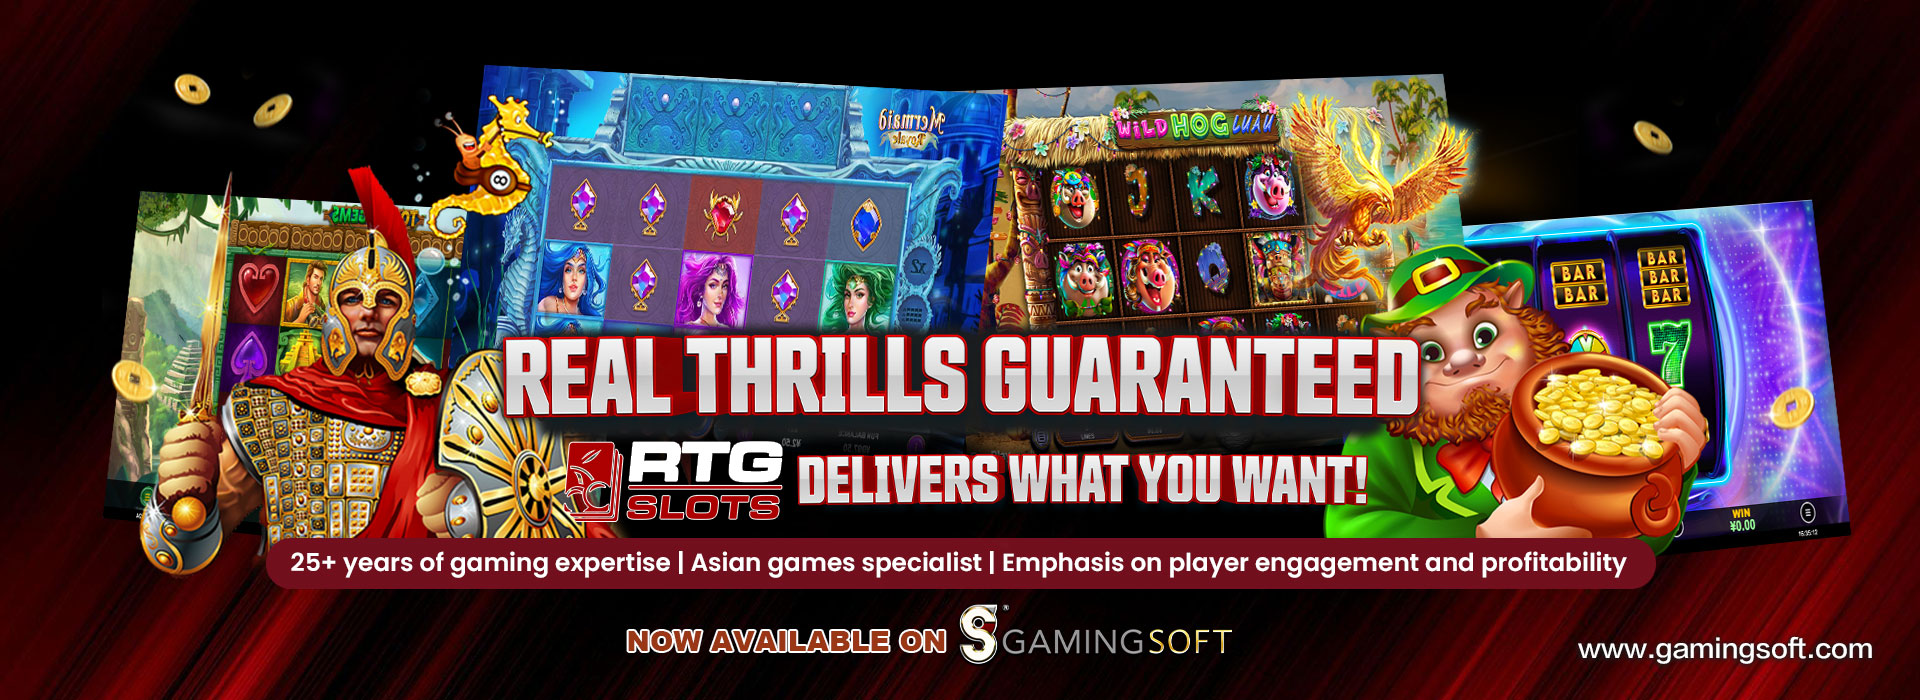 
RTG Slots Real Thrills guaranteed Delivers what you want Web Banner - GamingSoftWeb 